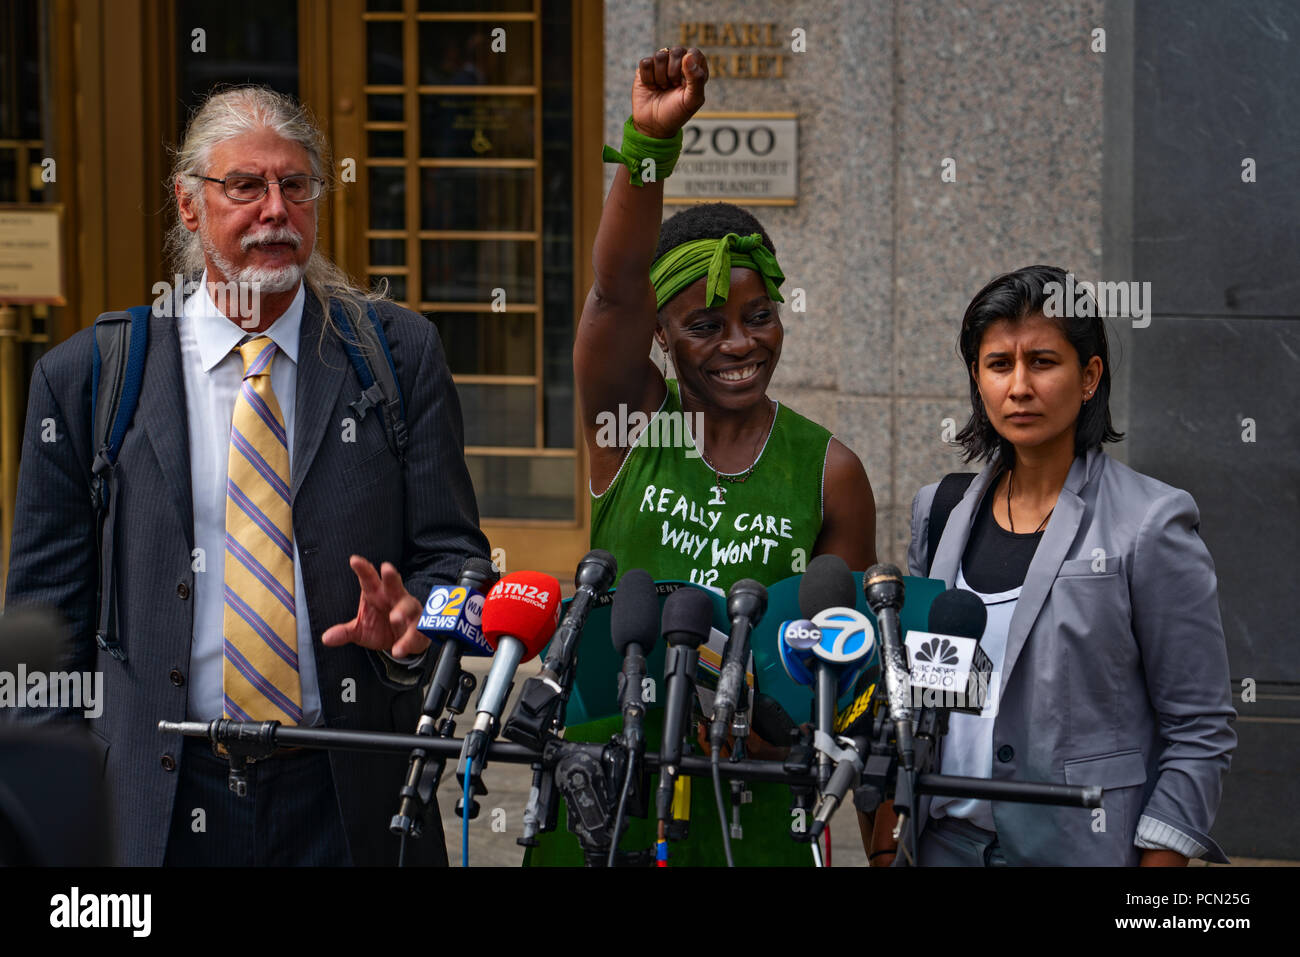 New York, New York, U.S., 3 August 2018 Immigration activist Therese Patricia Okoumou, with lawyers at her side, speaks outside federal court in Manhattan after hearing on trespassing & disorderly conduct charges.  Okoumou scaled the base of the Statue of Liberty on July 4, 2018, to protest against Trump administration immigration policies.  Okoumou wore a green dress to court bearing the words “I really care why won’t u?” – a response to first lady Melania Trump, who wore a jacket with the words “I really don’t care, do u?” when she visited a facility for migrant children in June. Stock Photo